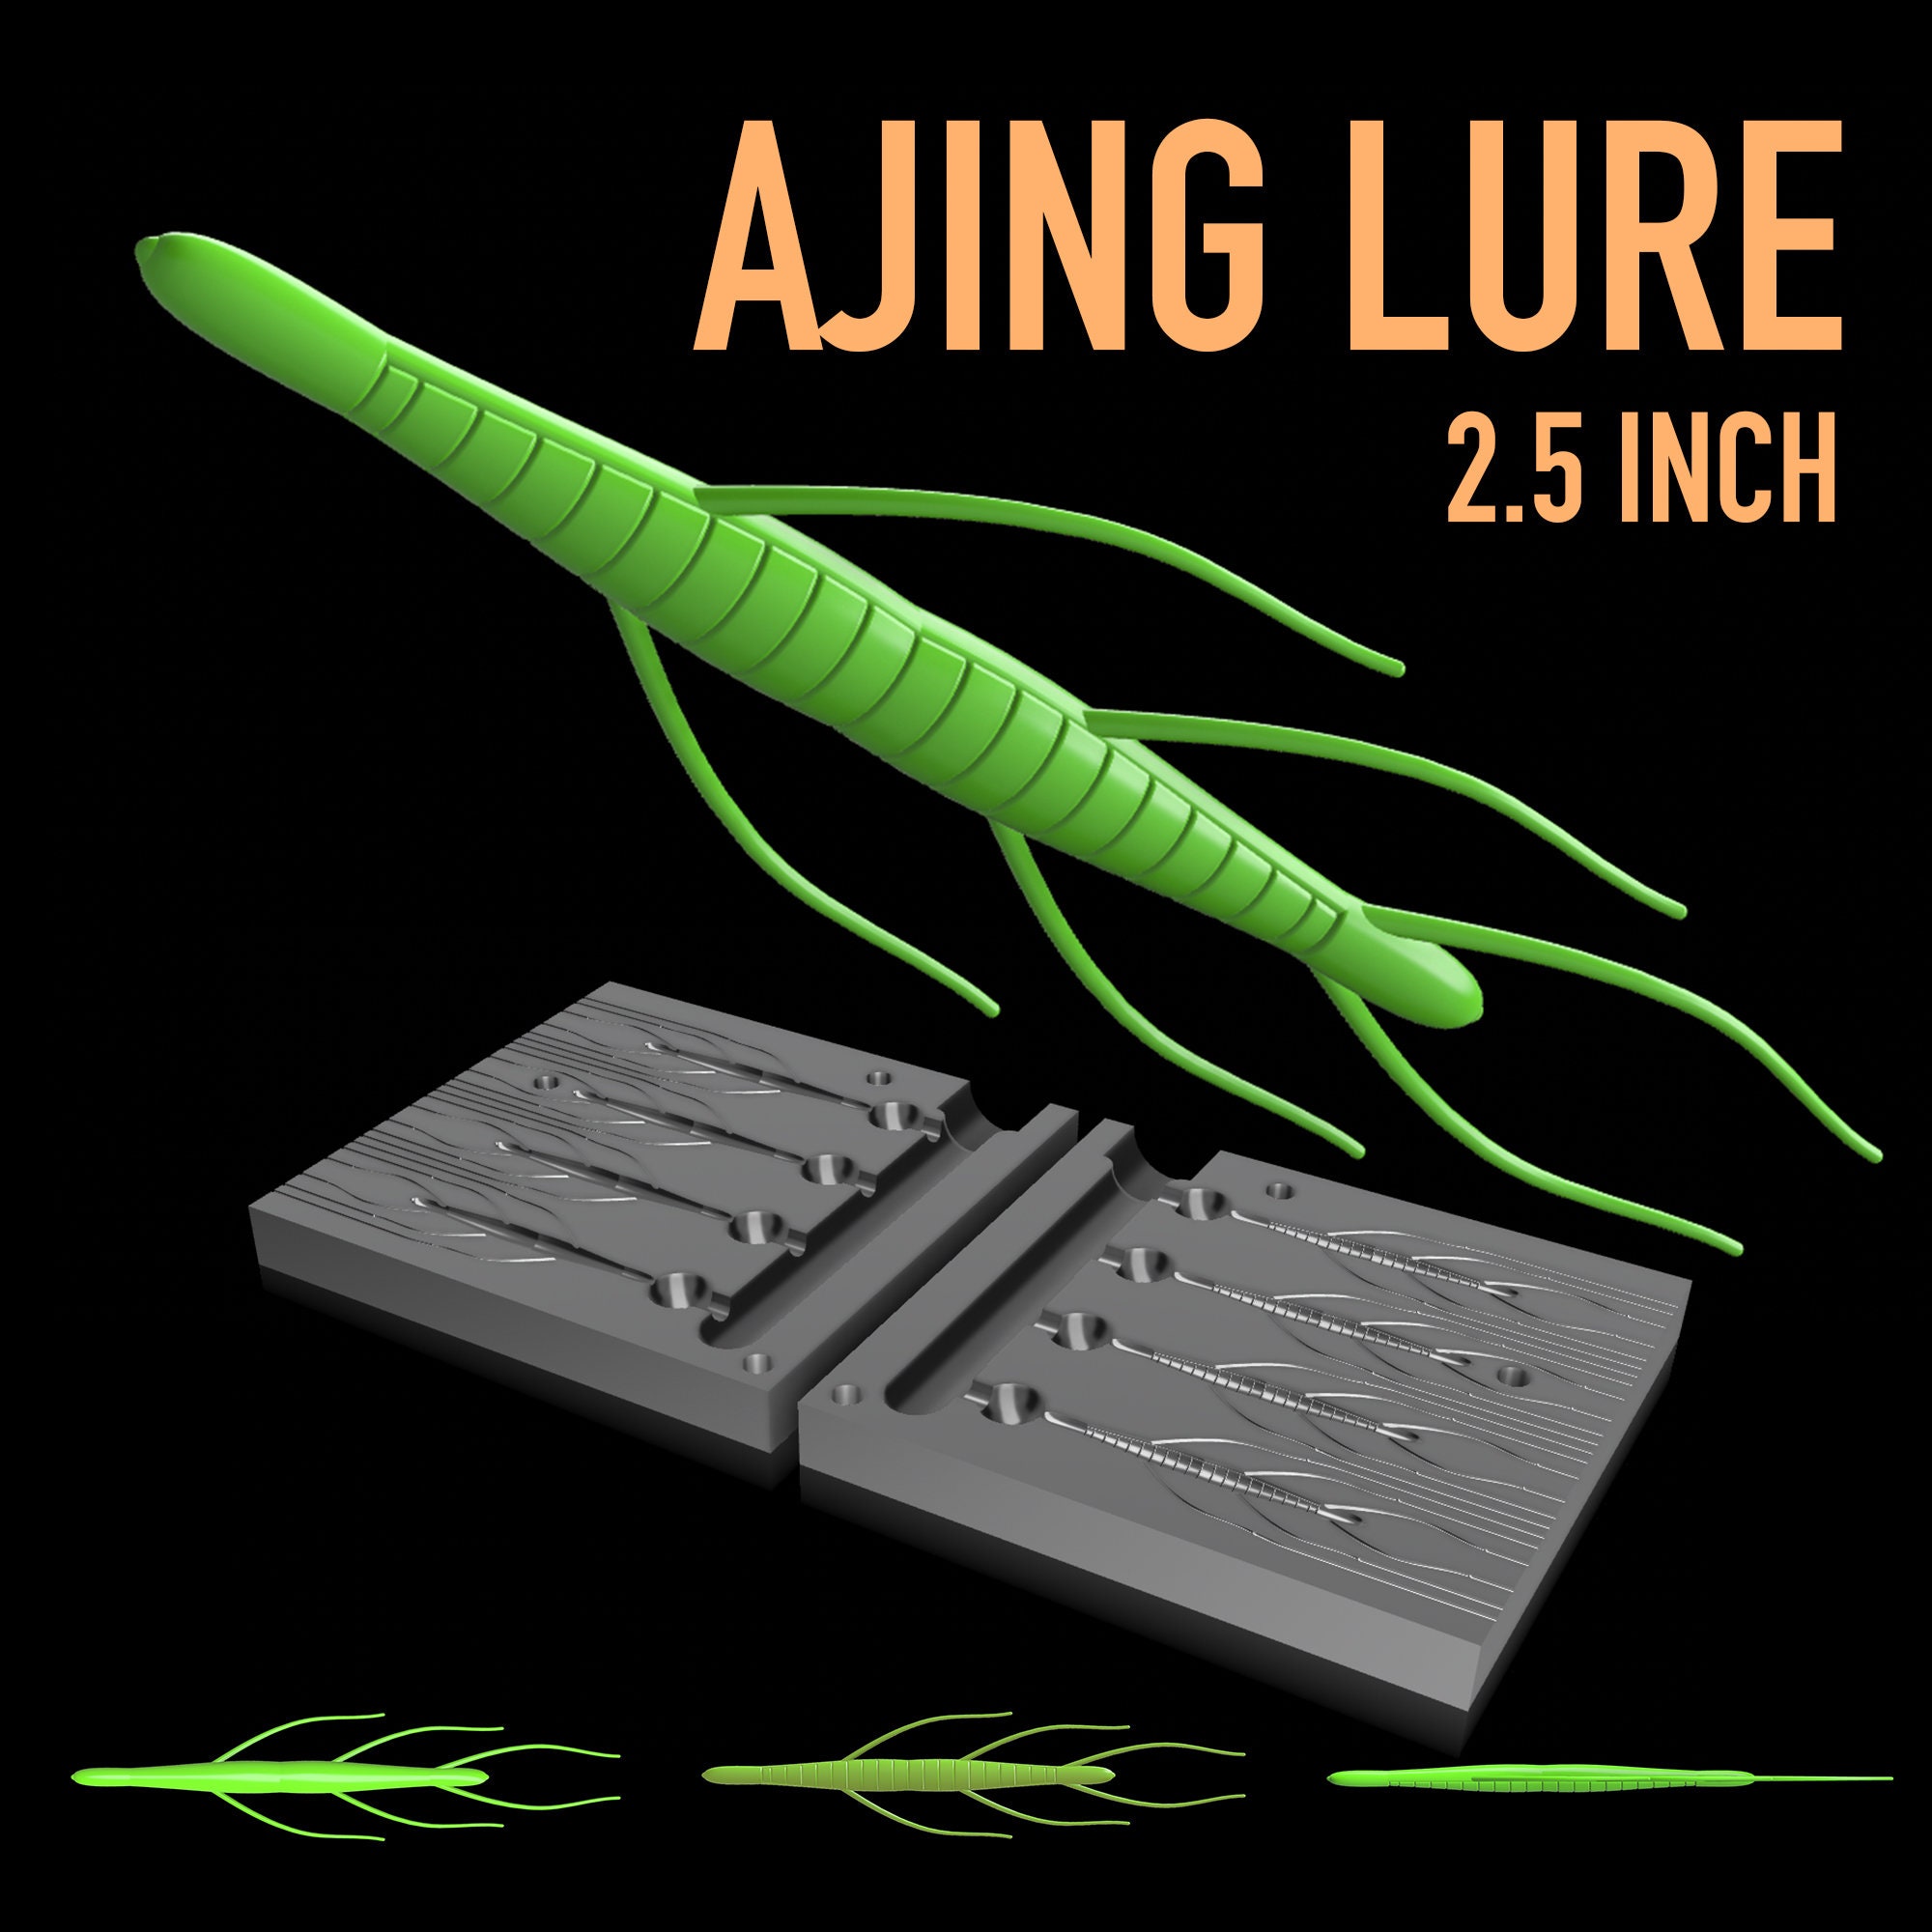 Digital File: Mold Ajing Lure 2.5 Inch STL, STEP, for 3d Print and Cnc 